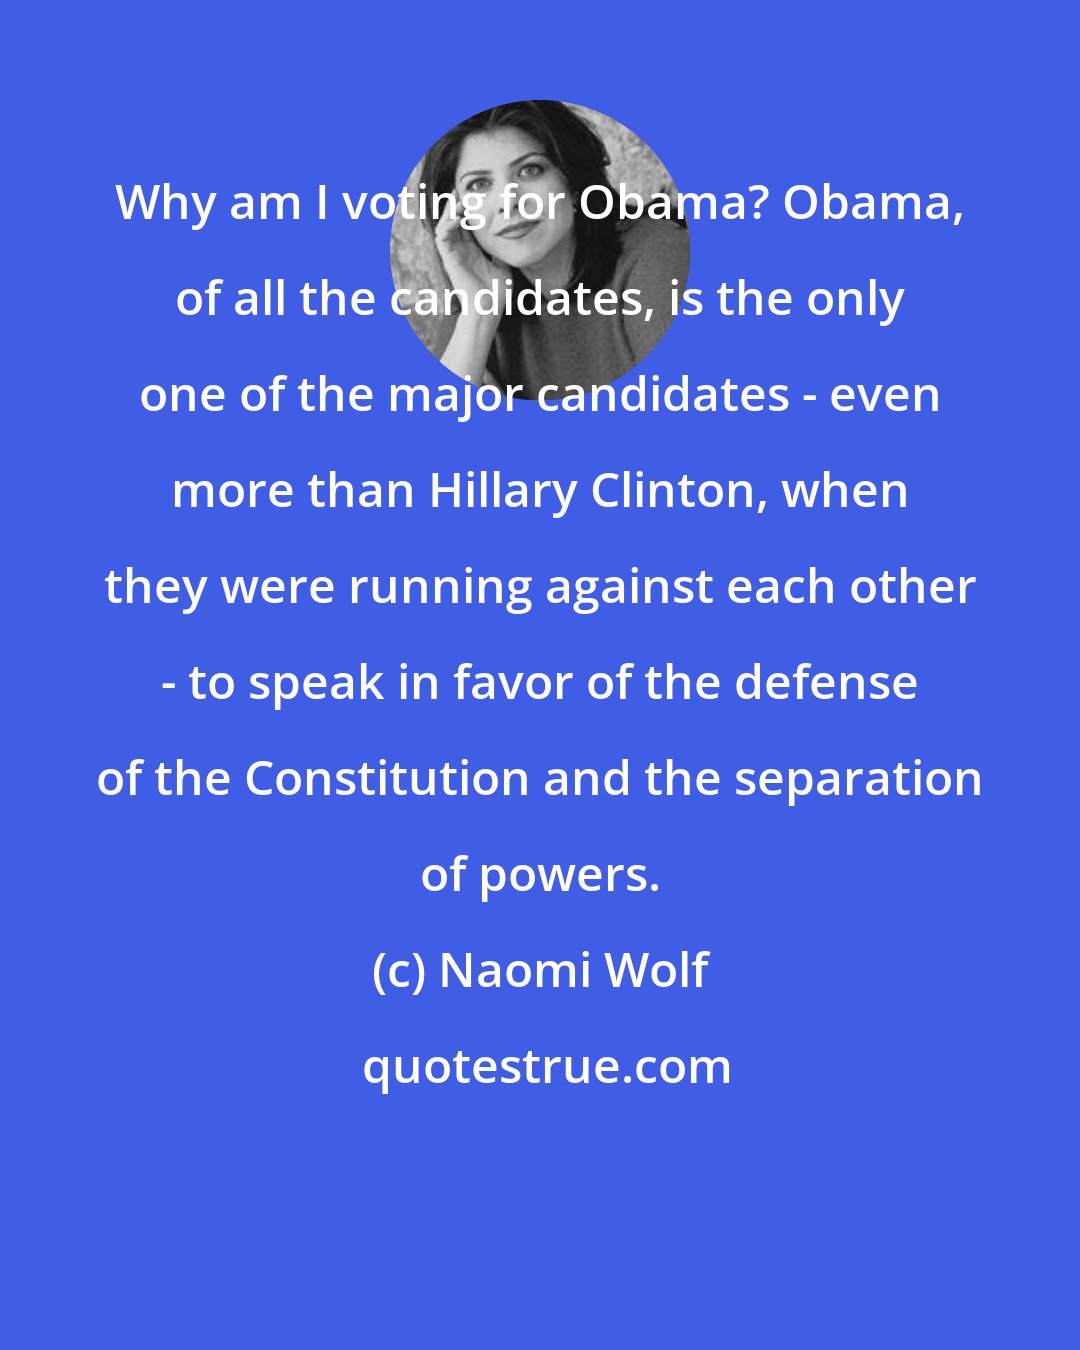 Naomi Wolf: Why am I voting for Obama? Obama, of all the candidates, is the only one of the major candidates - even more than Hillary Clinton, when they were running against each other - to speak in favor of the defense of the Constitution and the separation of powers.